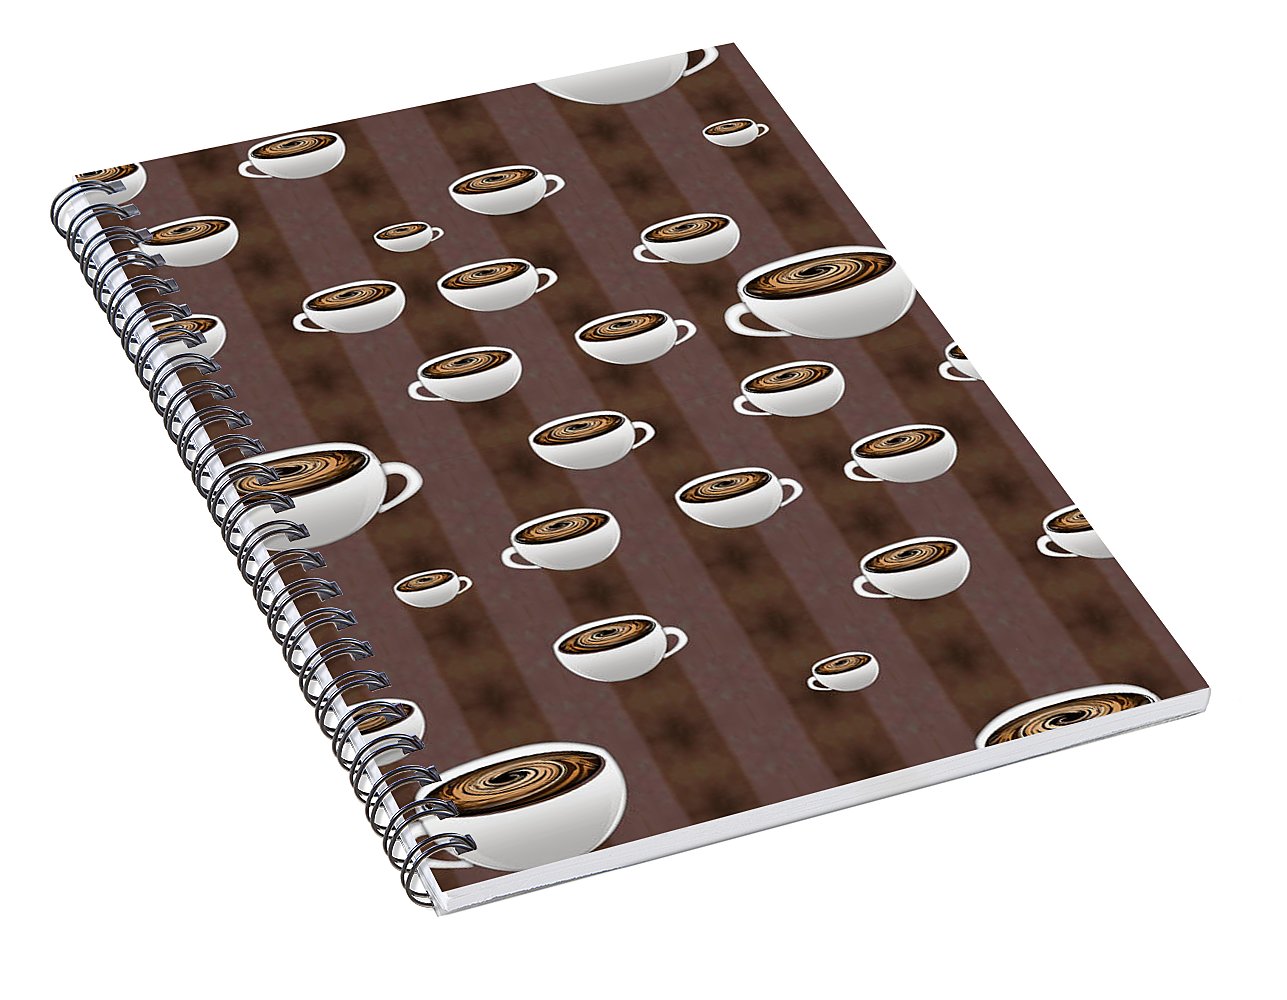 True Coffee Repeating - Spiral Notebook